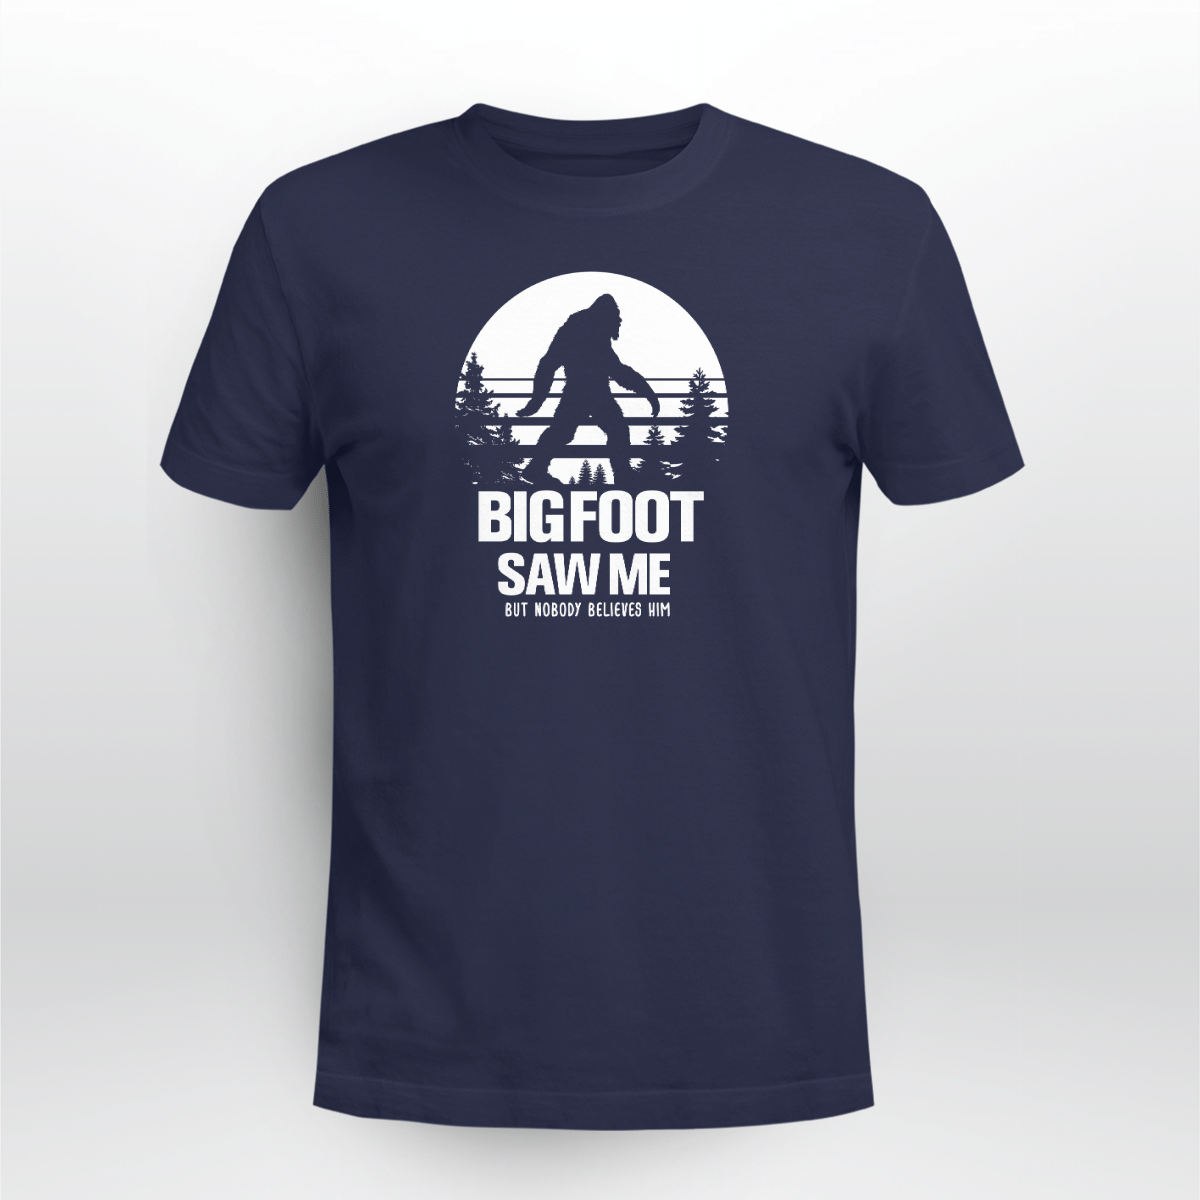 Bigfoot Saw Me But Noboby Believe Me Shirt Style: Unisex T-shirt, Color: Navy